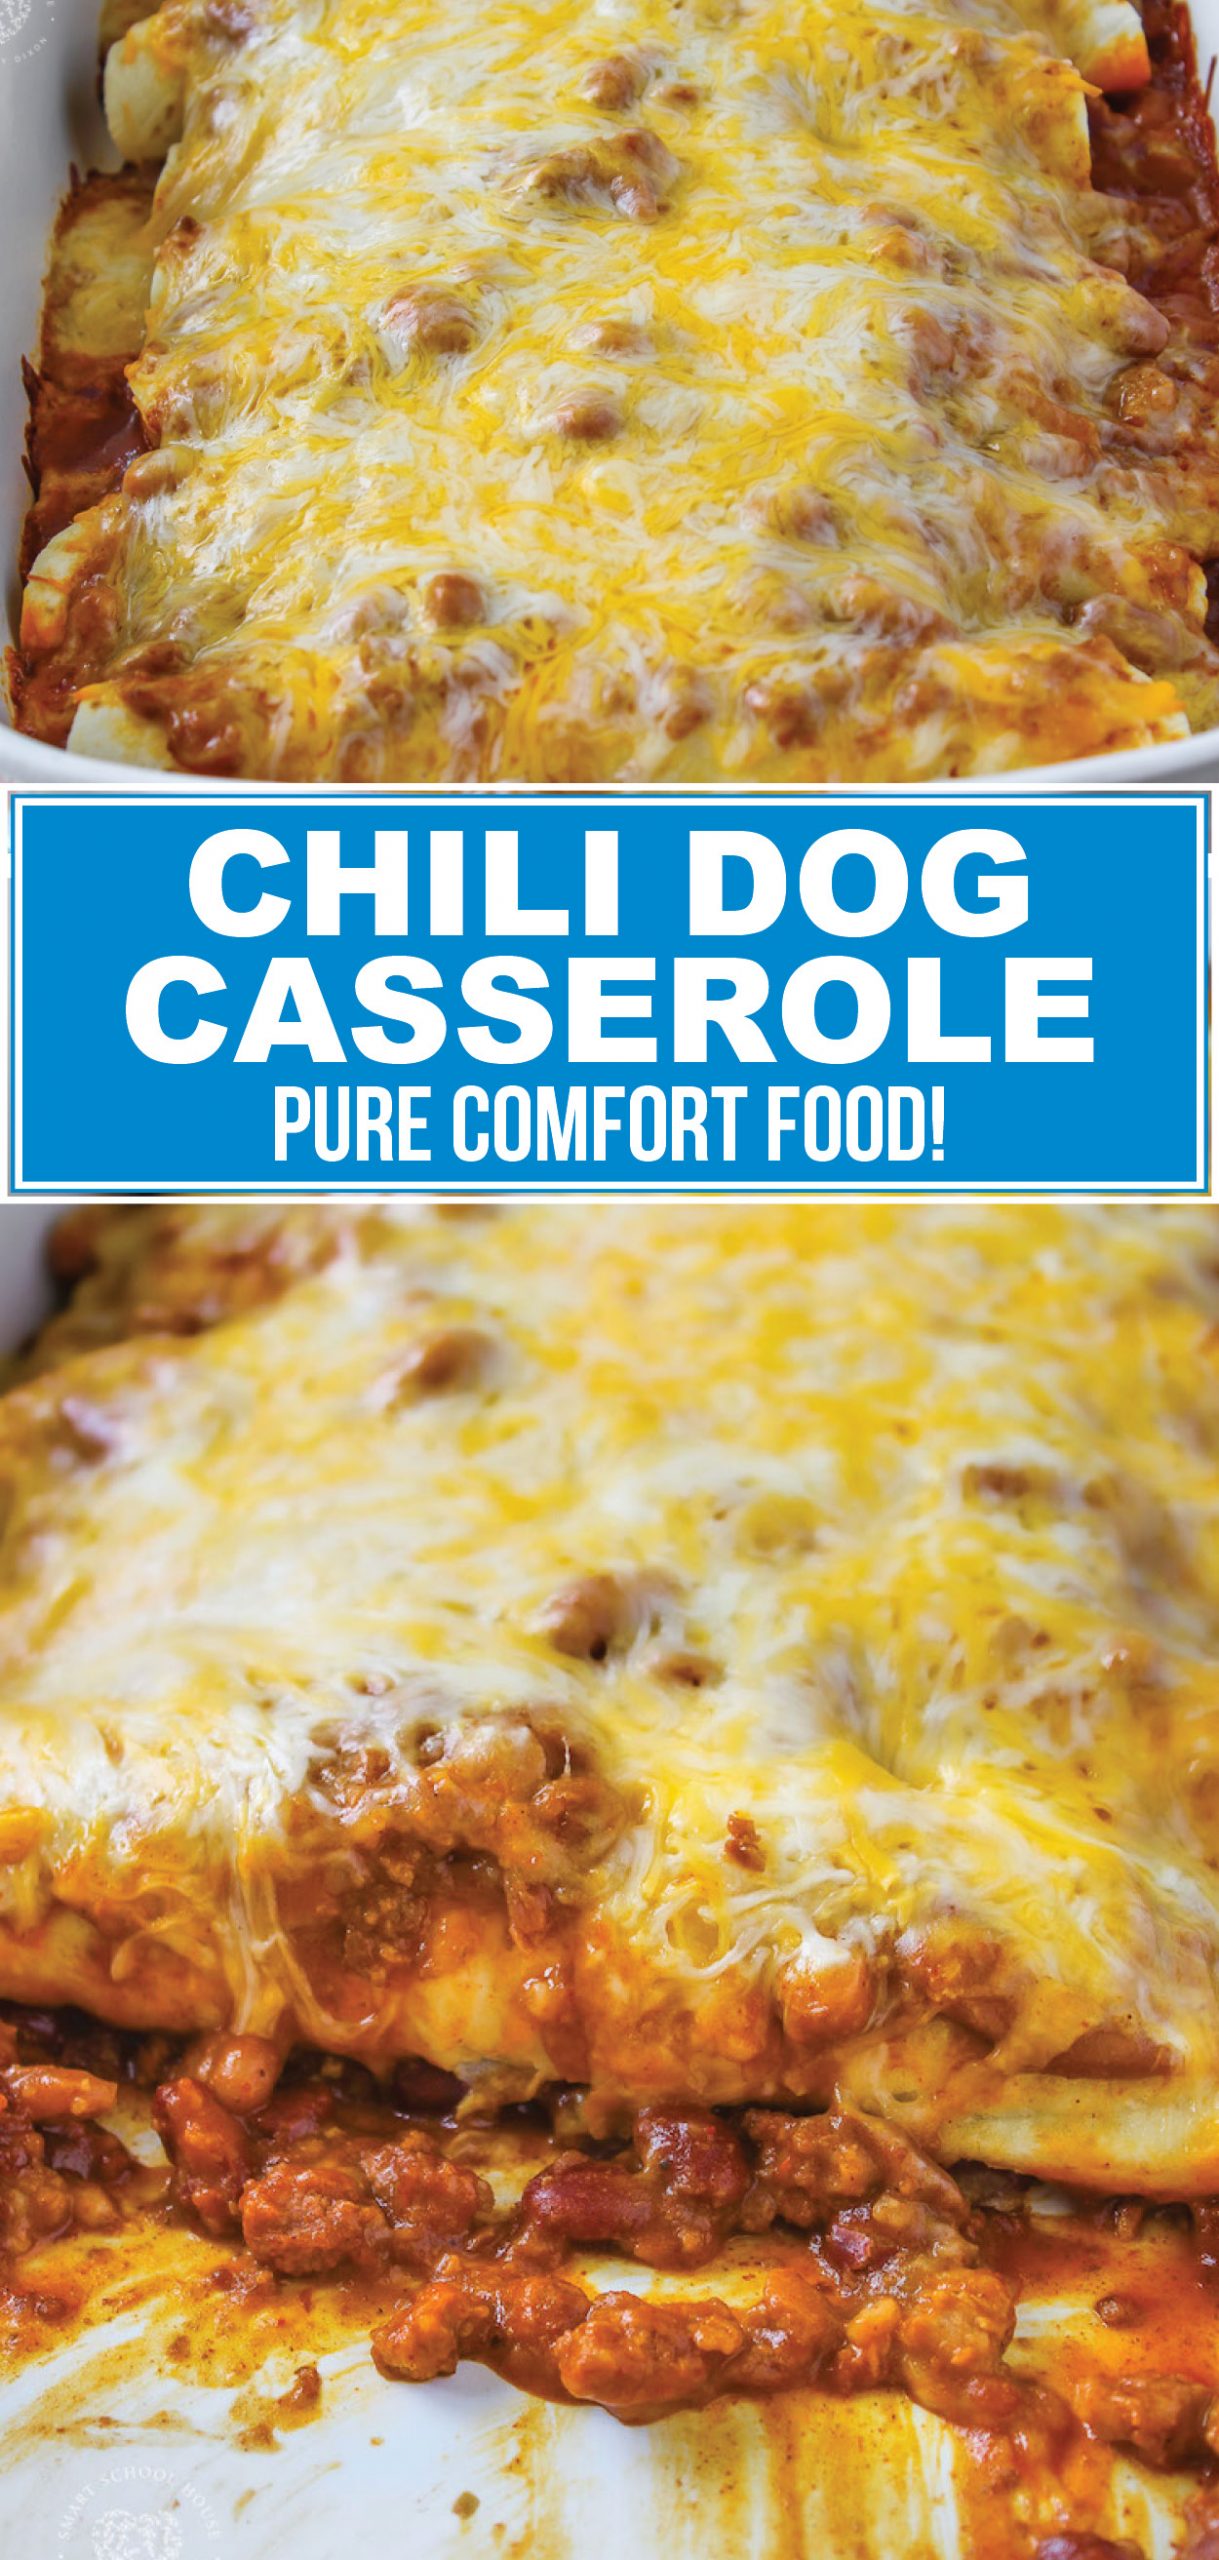 This Cheesy Chili Dog Casserole is pure comfort food. Hot dogs, chili, and cheddar cheese combined to make an easy and delicious meal. #hotdog #casserolerecipes